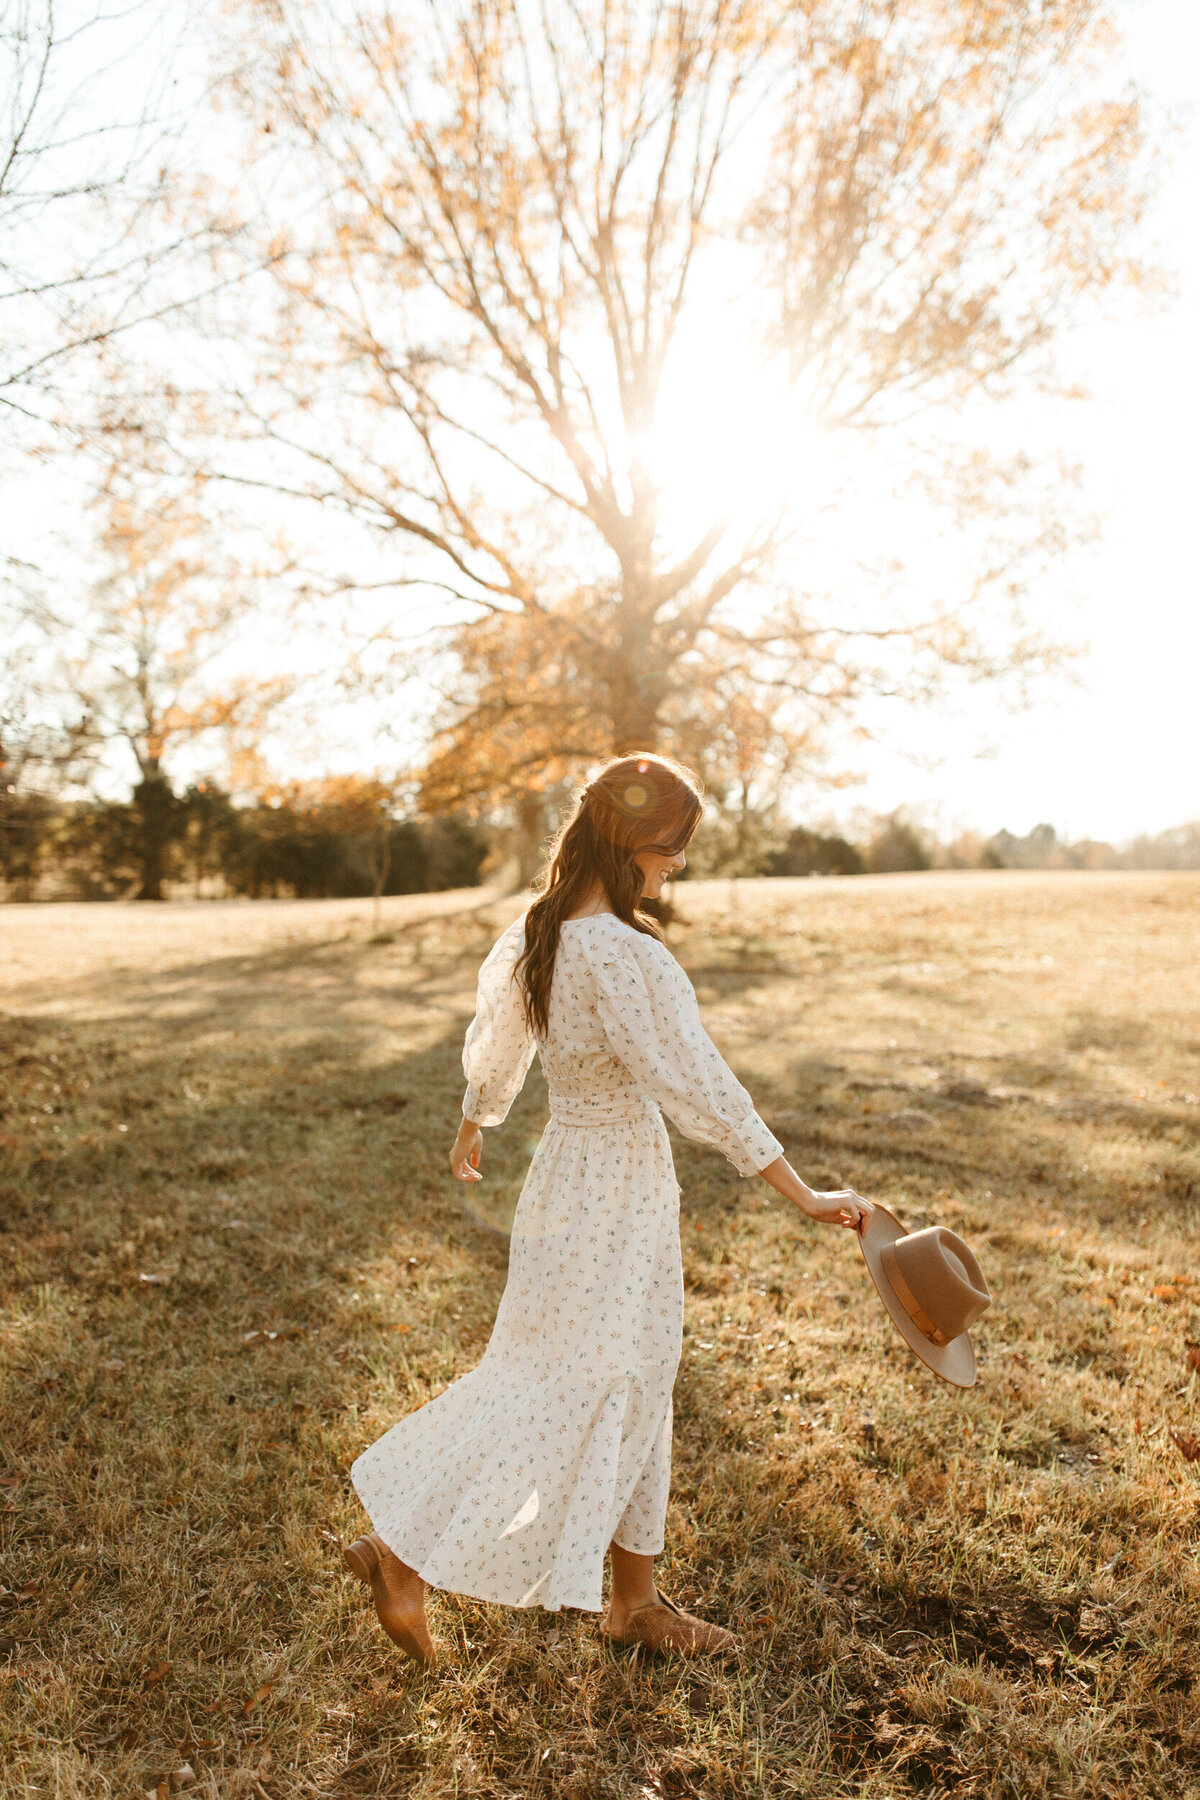 Boho senior girl twirling in a long white dress and holding a hat